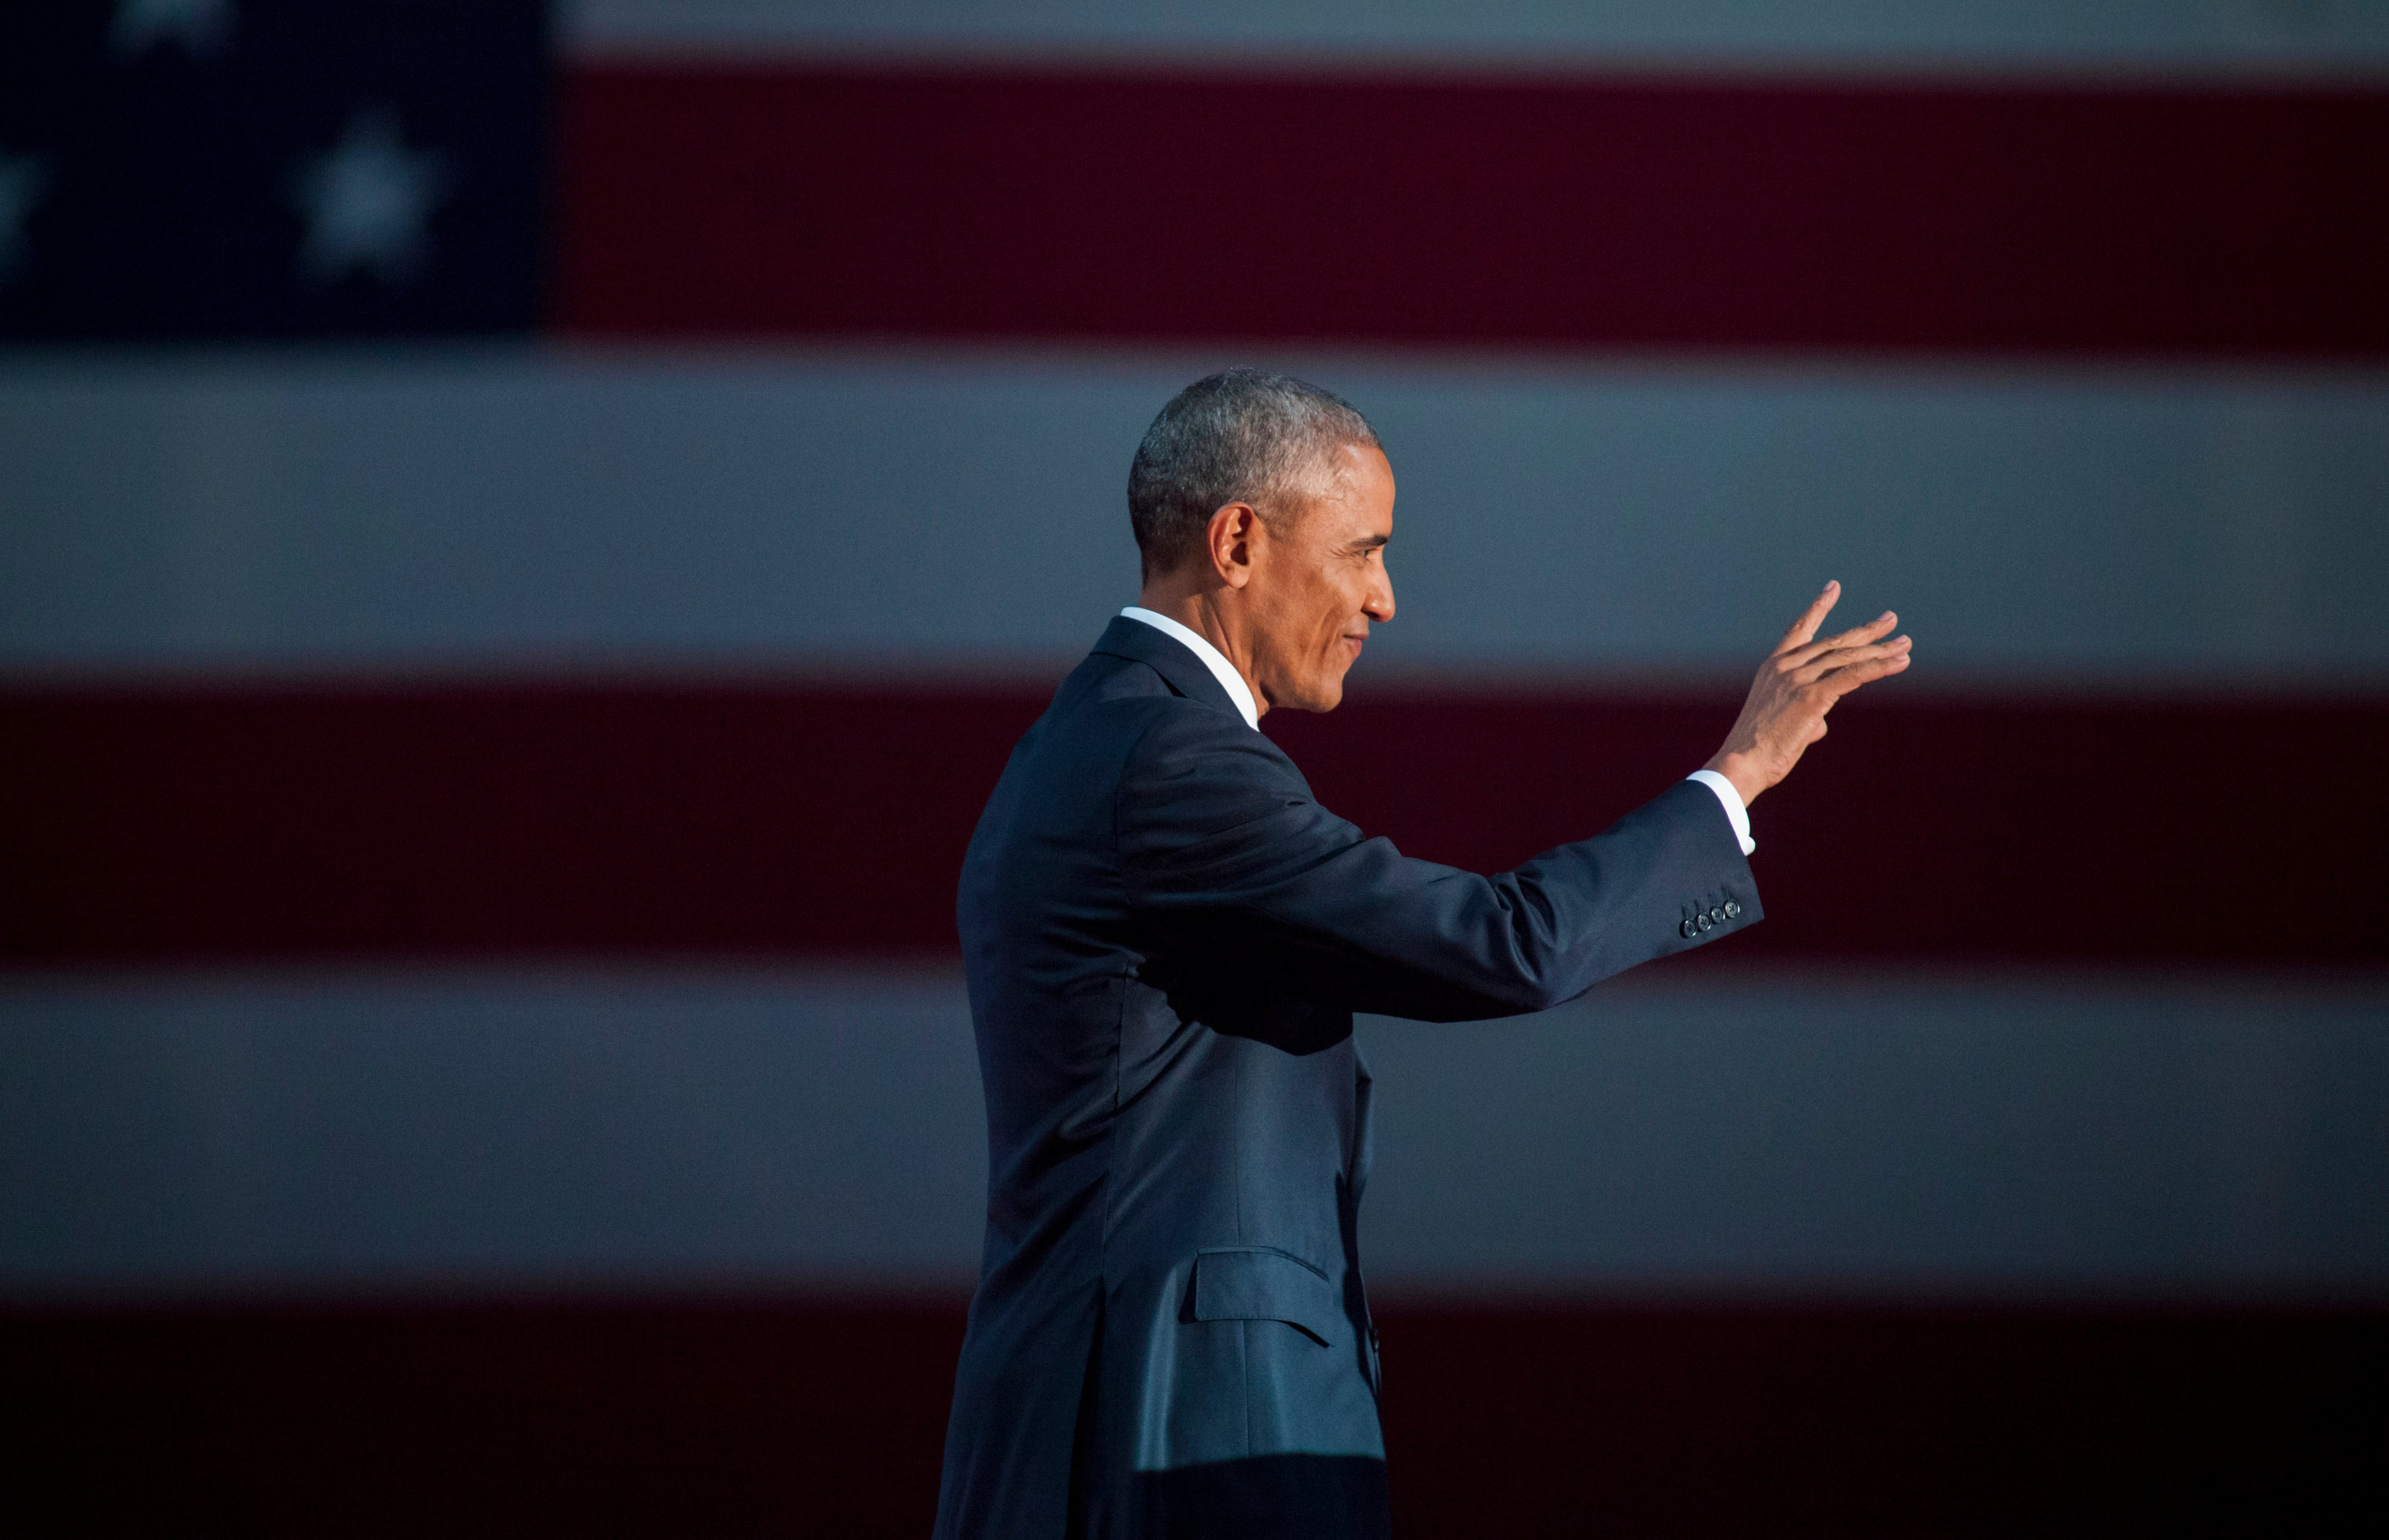 President Obama Delivers Farewell Address In Chicago